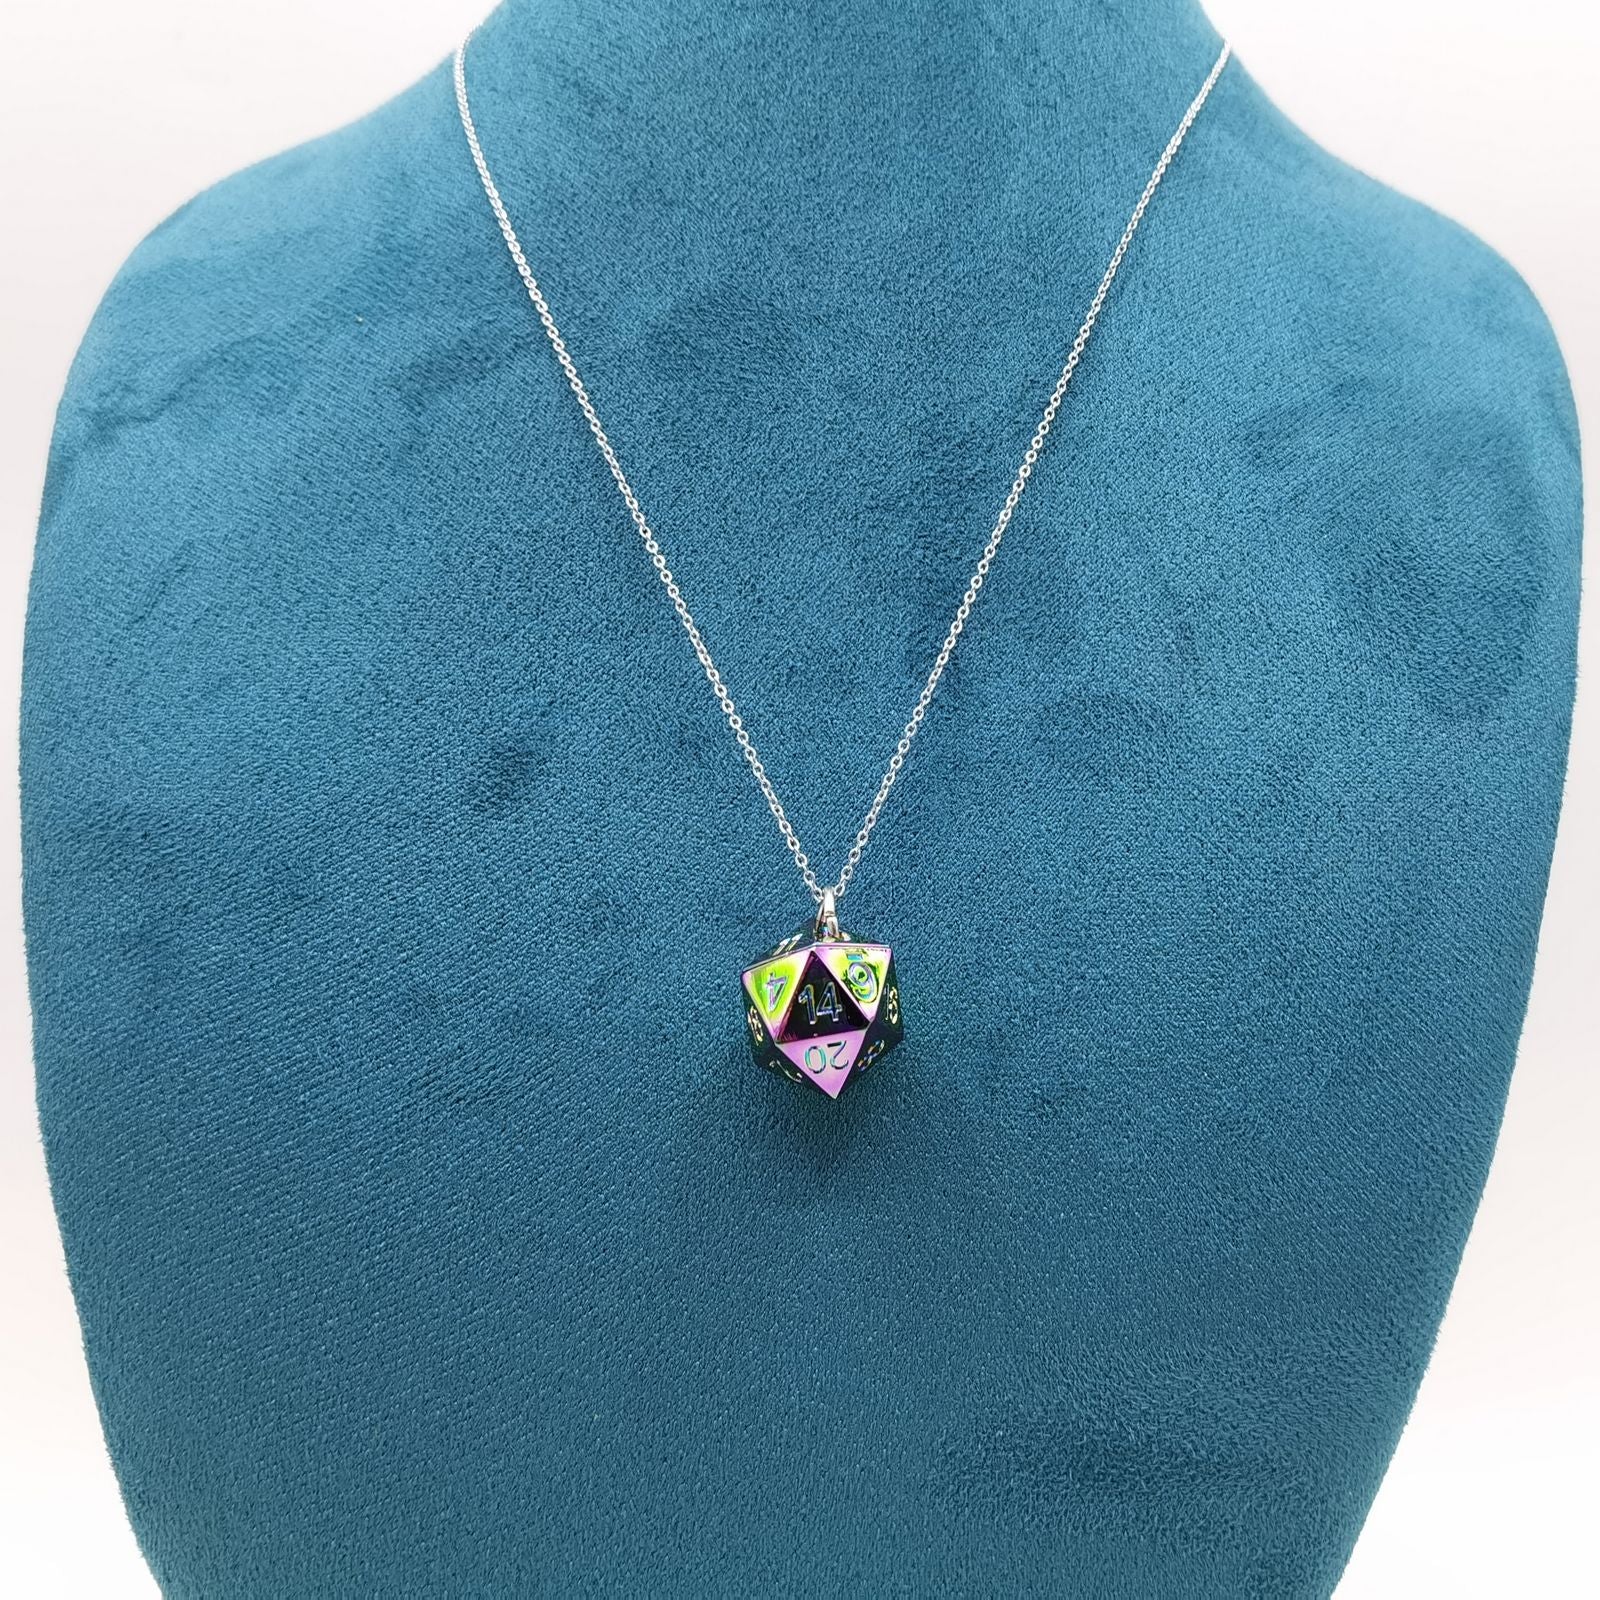 Prism Rainbow D20 dice necklace pendant with chain for D&D gamer - HYMGHO Dice 